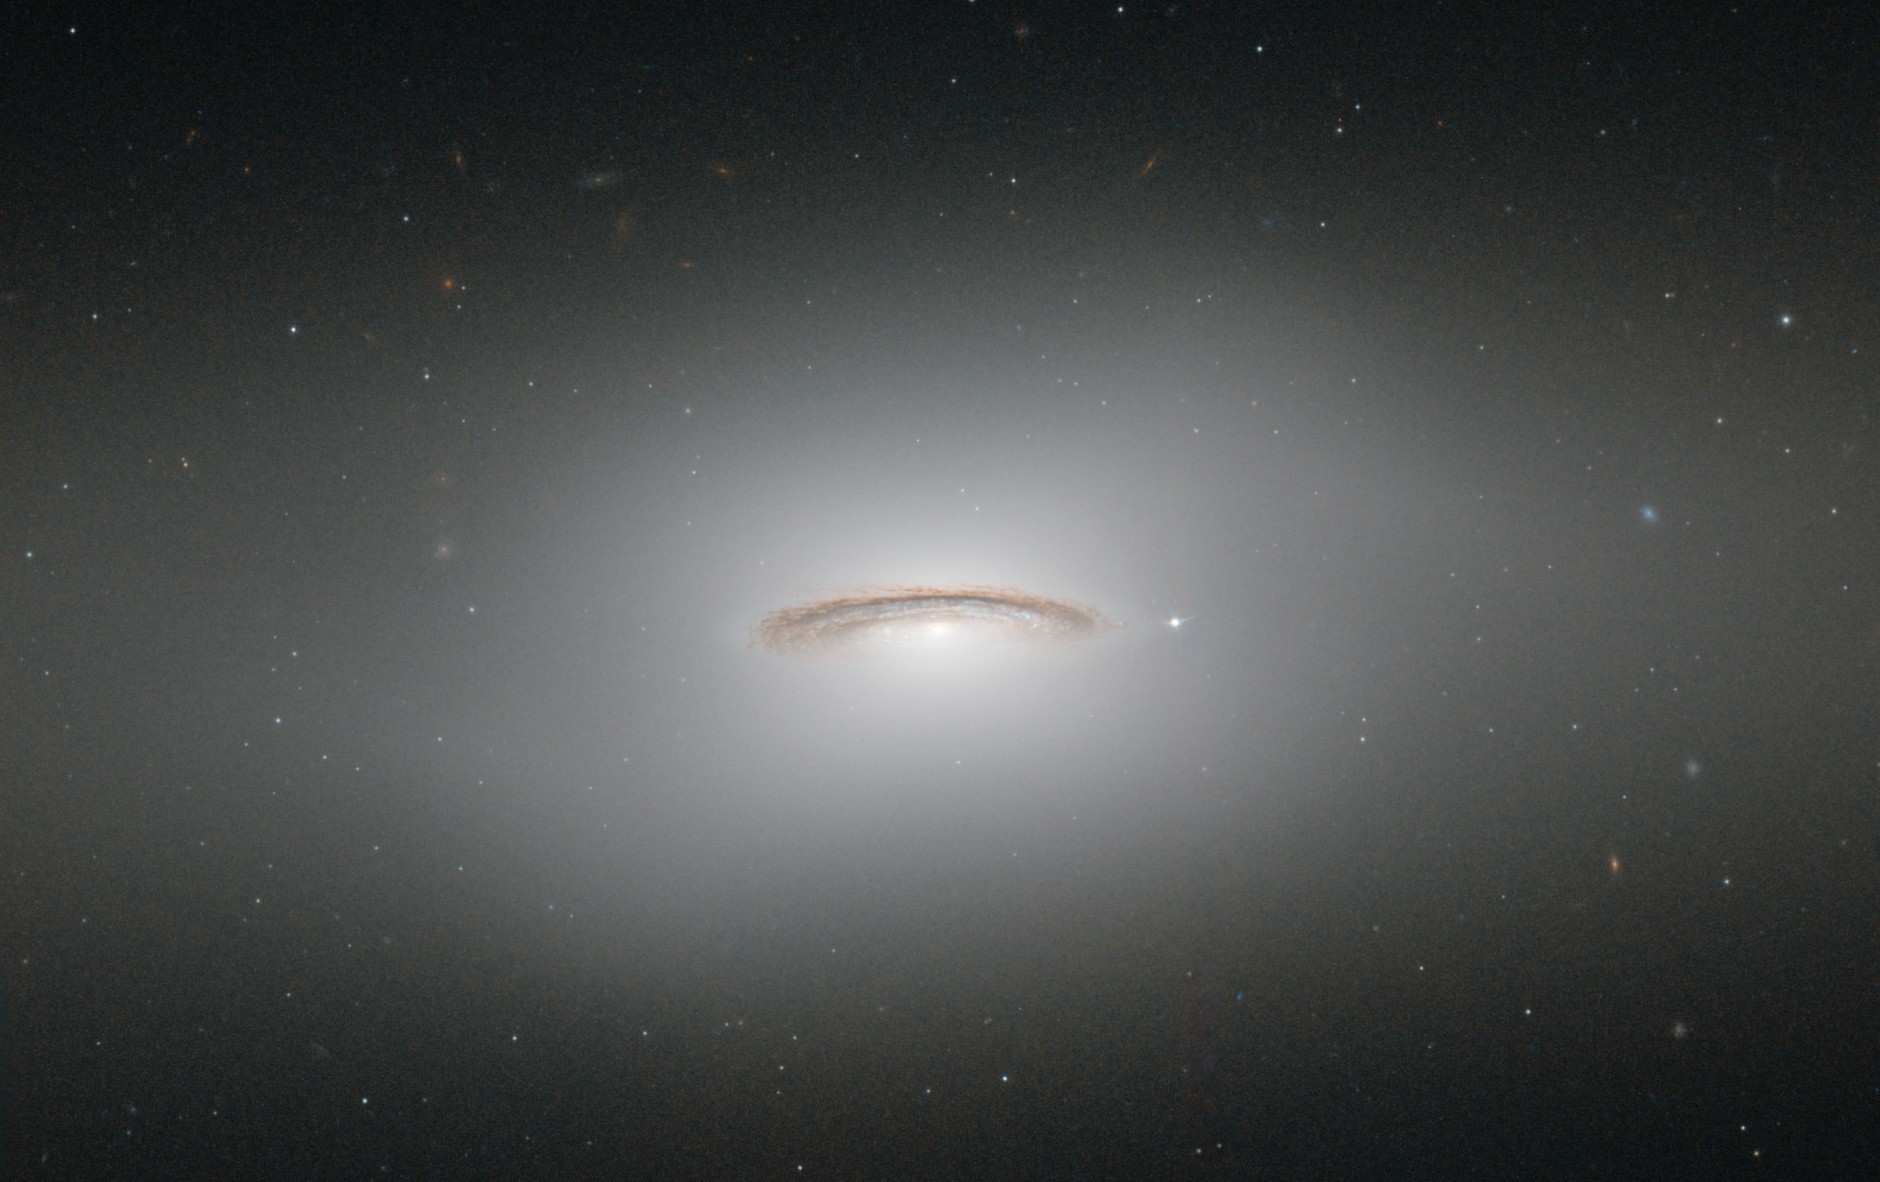 This image made by the NASA/ESA Hubble Space Telescope shows NGC 4526. One of the brightest lenticular galaxies known, it has hosted two known supernova explosions, one in 1969 and another in 1994, and is known to have a supermassive black hole at its center with a mass of 450 million Suns. NGC 4526 is part of the Virgo cluster of galaxies. A version of this image was entered into the Hubble's Hidden Treasures image processing competition by contestant Judy Schmidt during an initiative to invite astronomy enthusiasts to search the Hubble archive for notable images that have never been seen by the general public. The Hubble Space Telescope marks its 25th anniversary. A full decade in the making, Hubble rocketed into orbit on April 24, 1990, aboard space shuttle Discovery.  (ESA/Hubble &amp; NASA via AP)